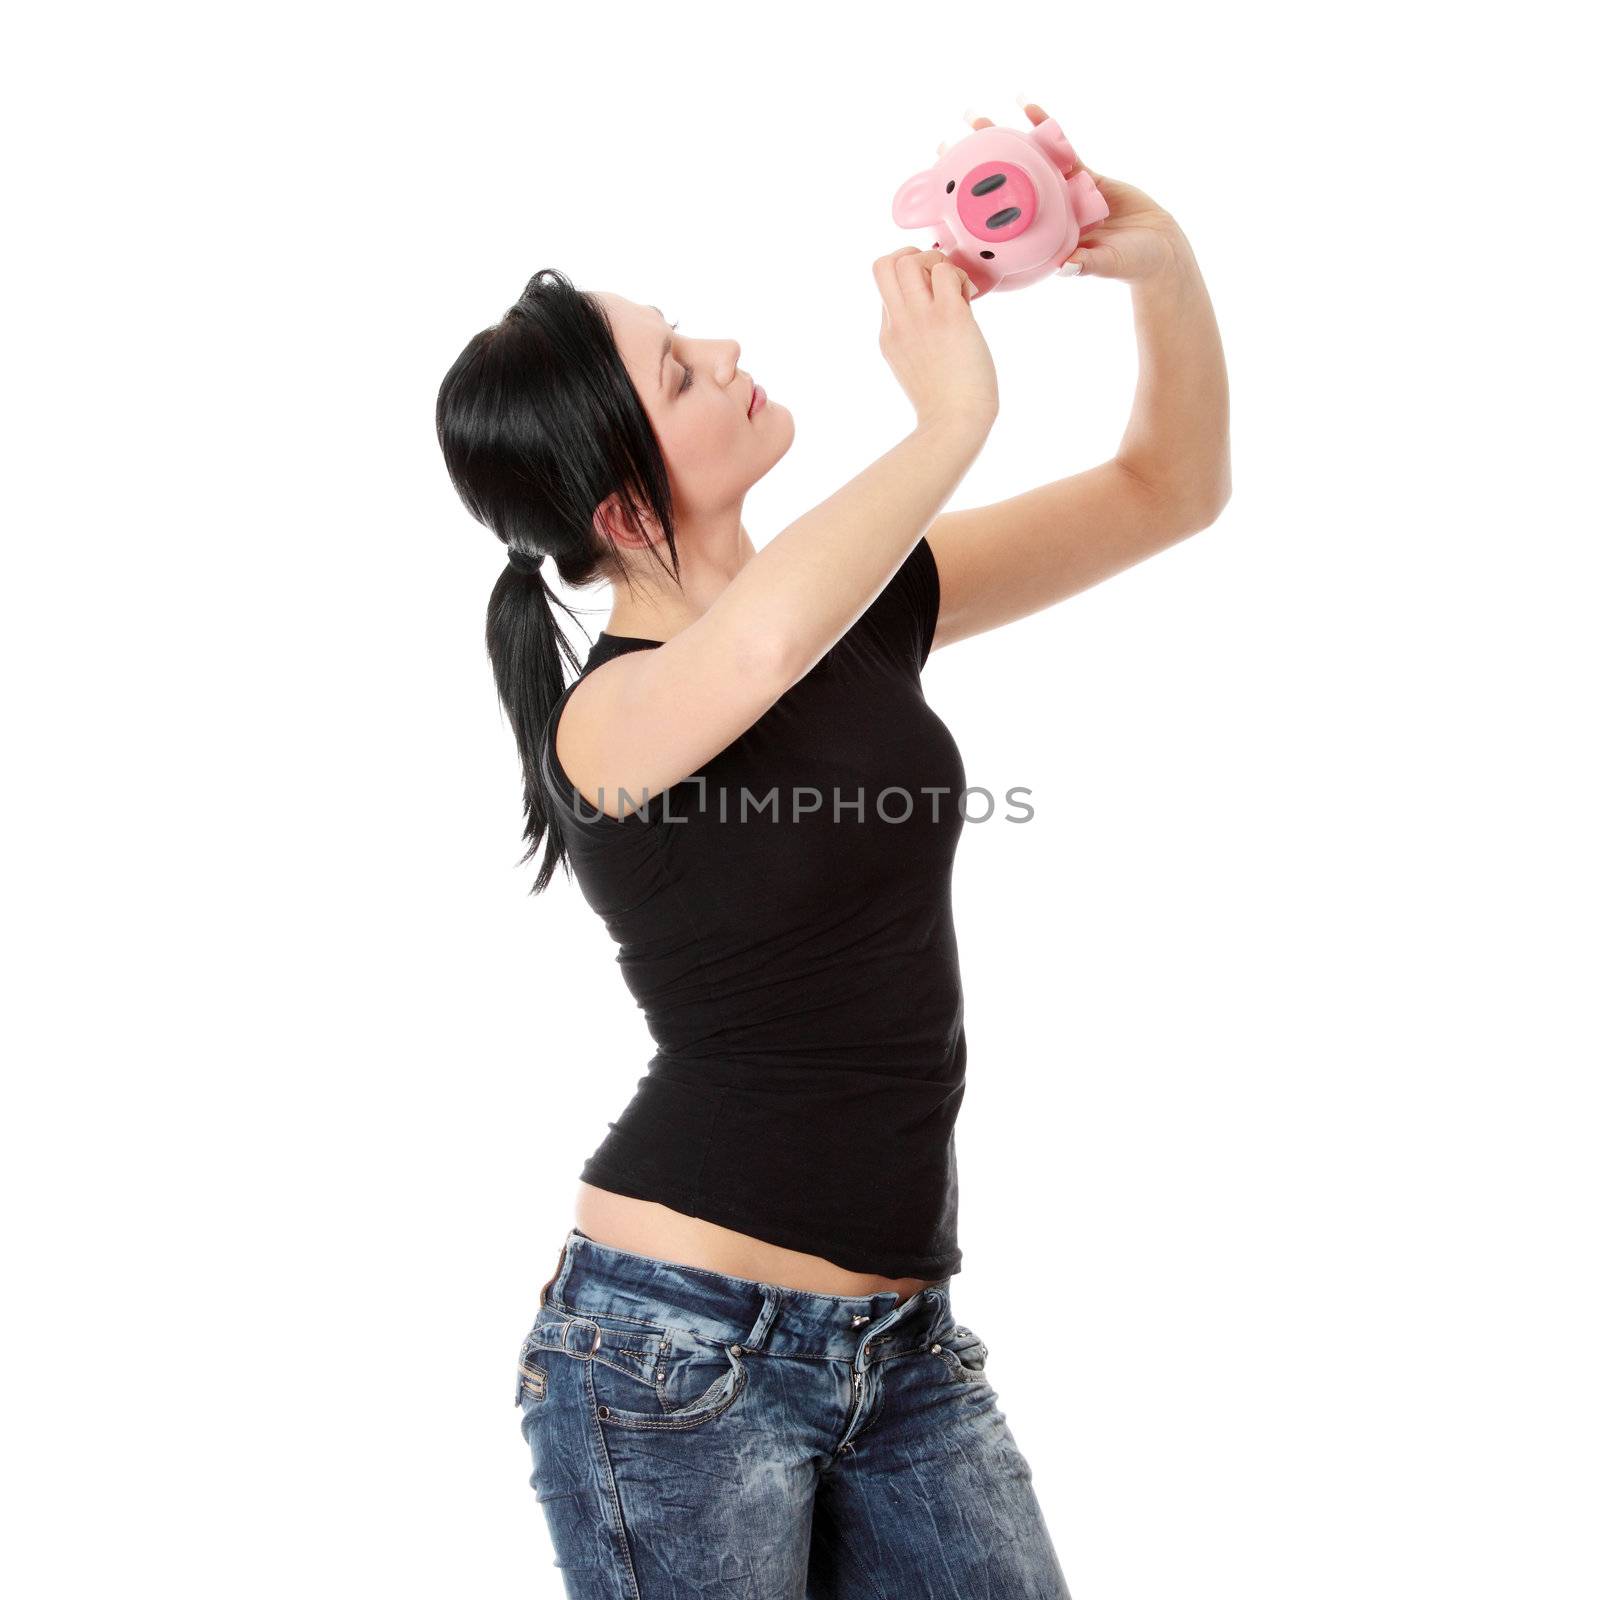 Savings concept - a woman with a piggy bank trying to get out some money - isolated over white 